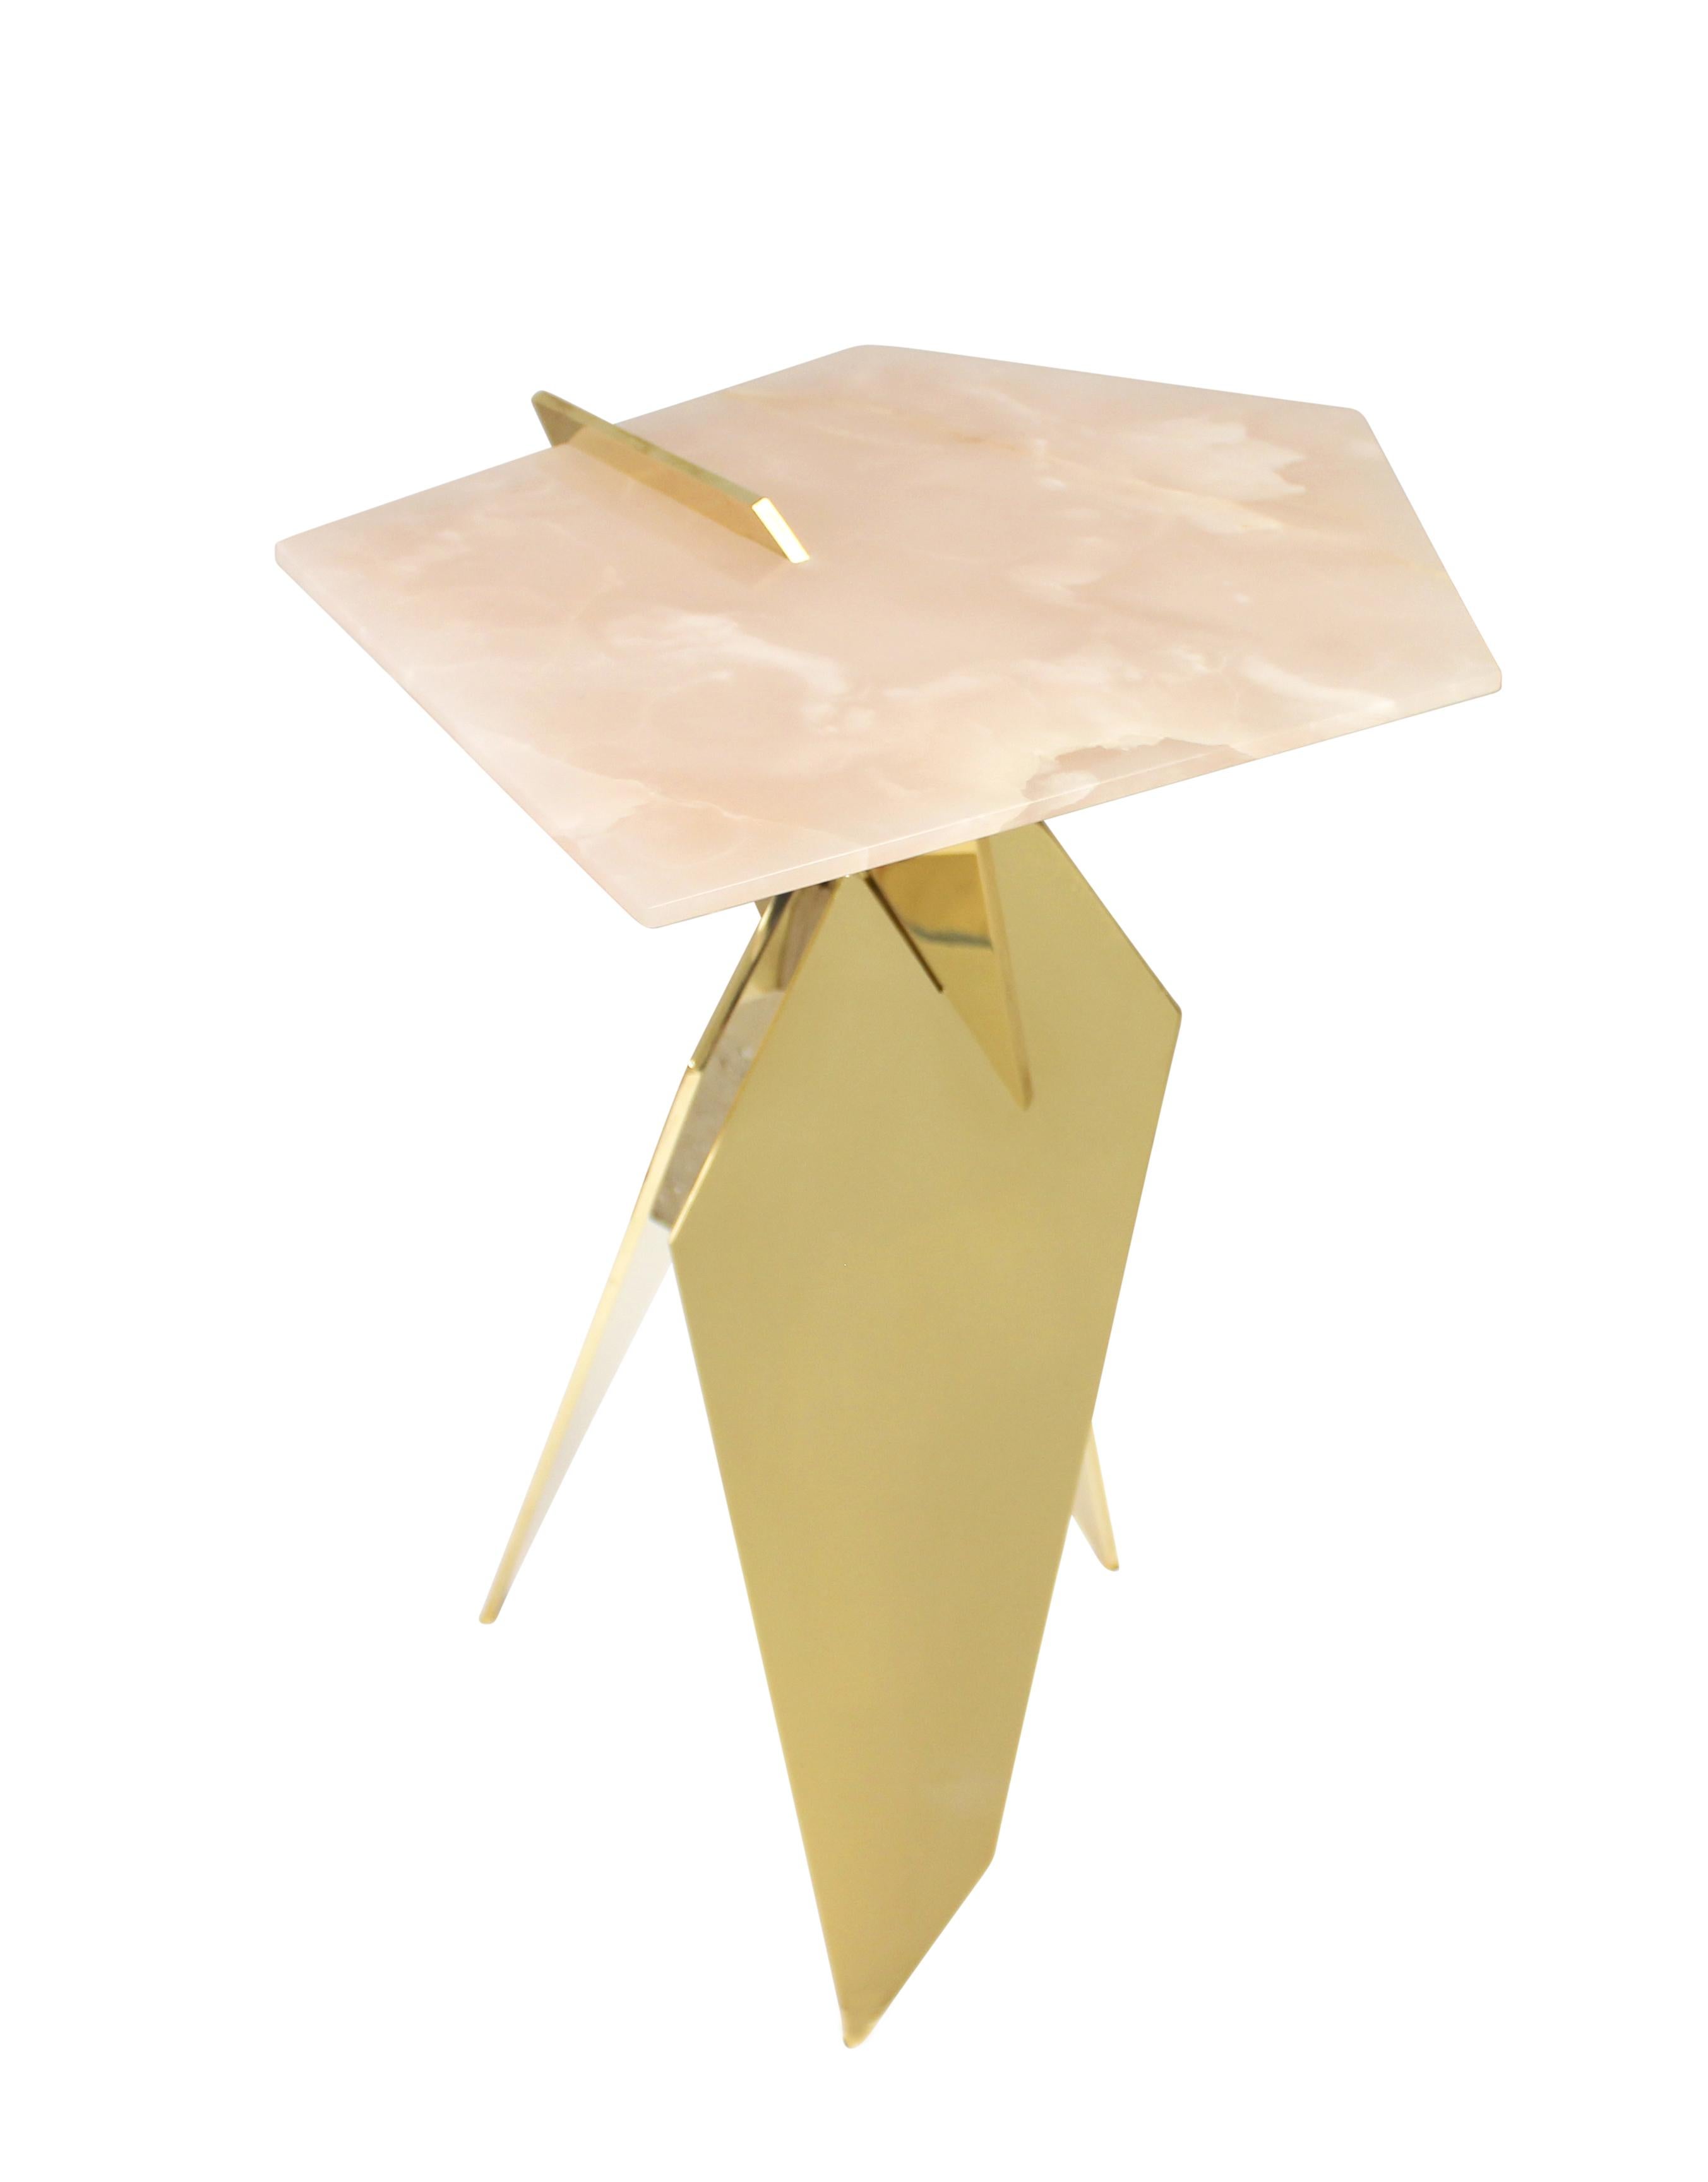 Sculptural side table made of hand polished solid bronze plates topped with pink onyx stone. Available in custom sizes, materials, and finishes.